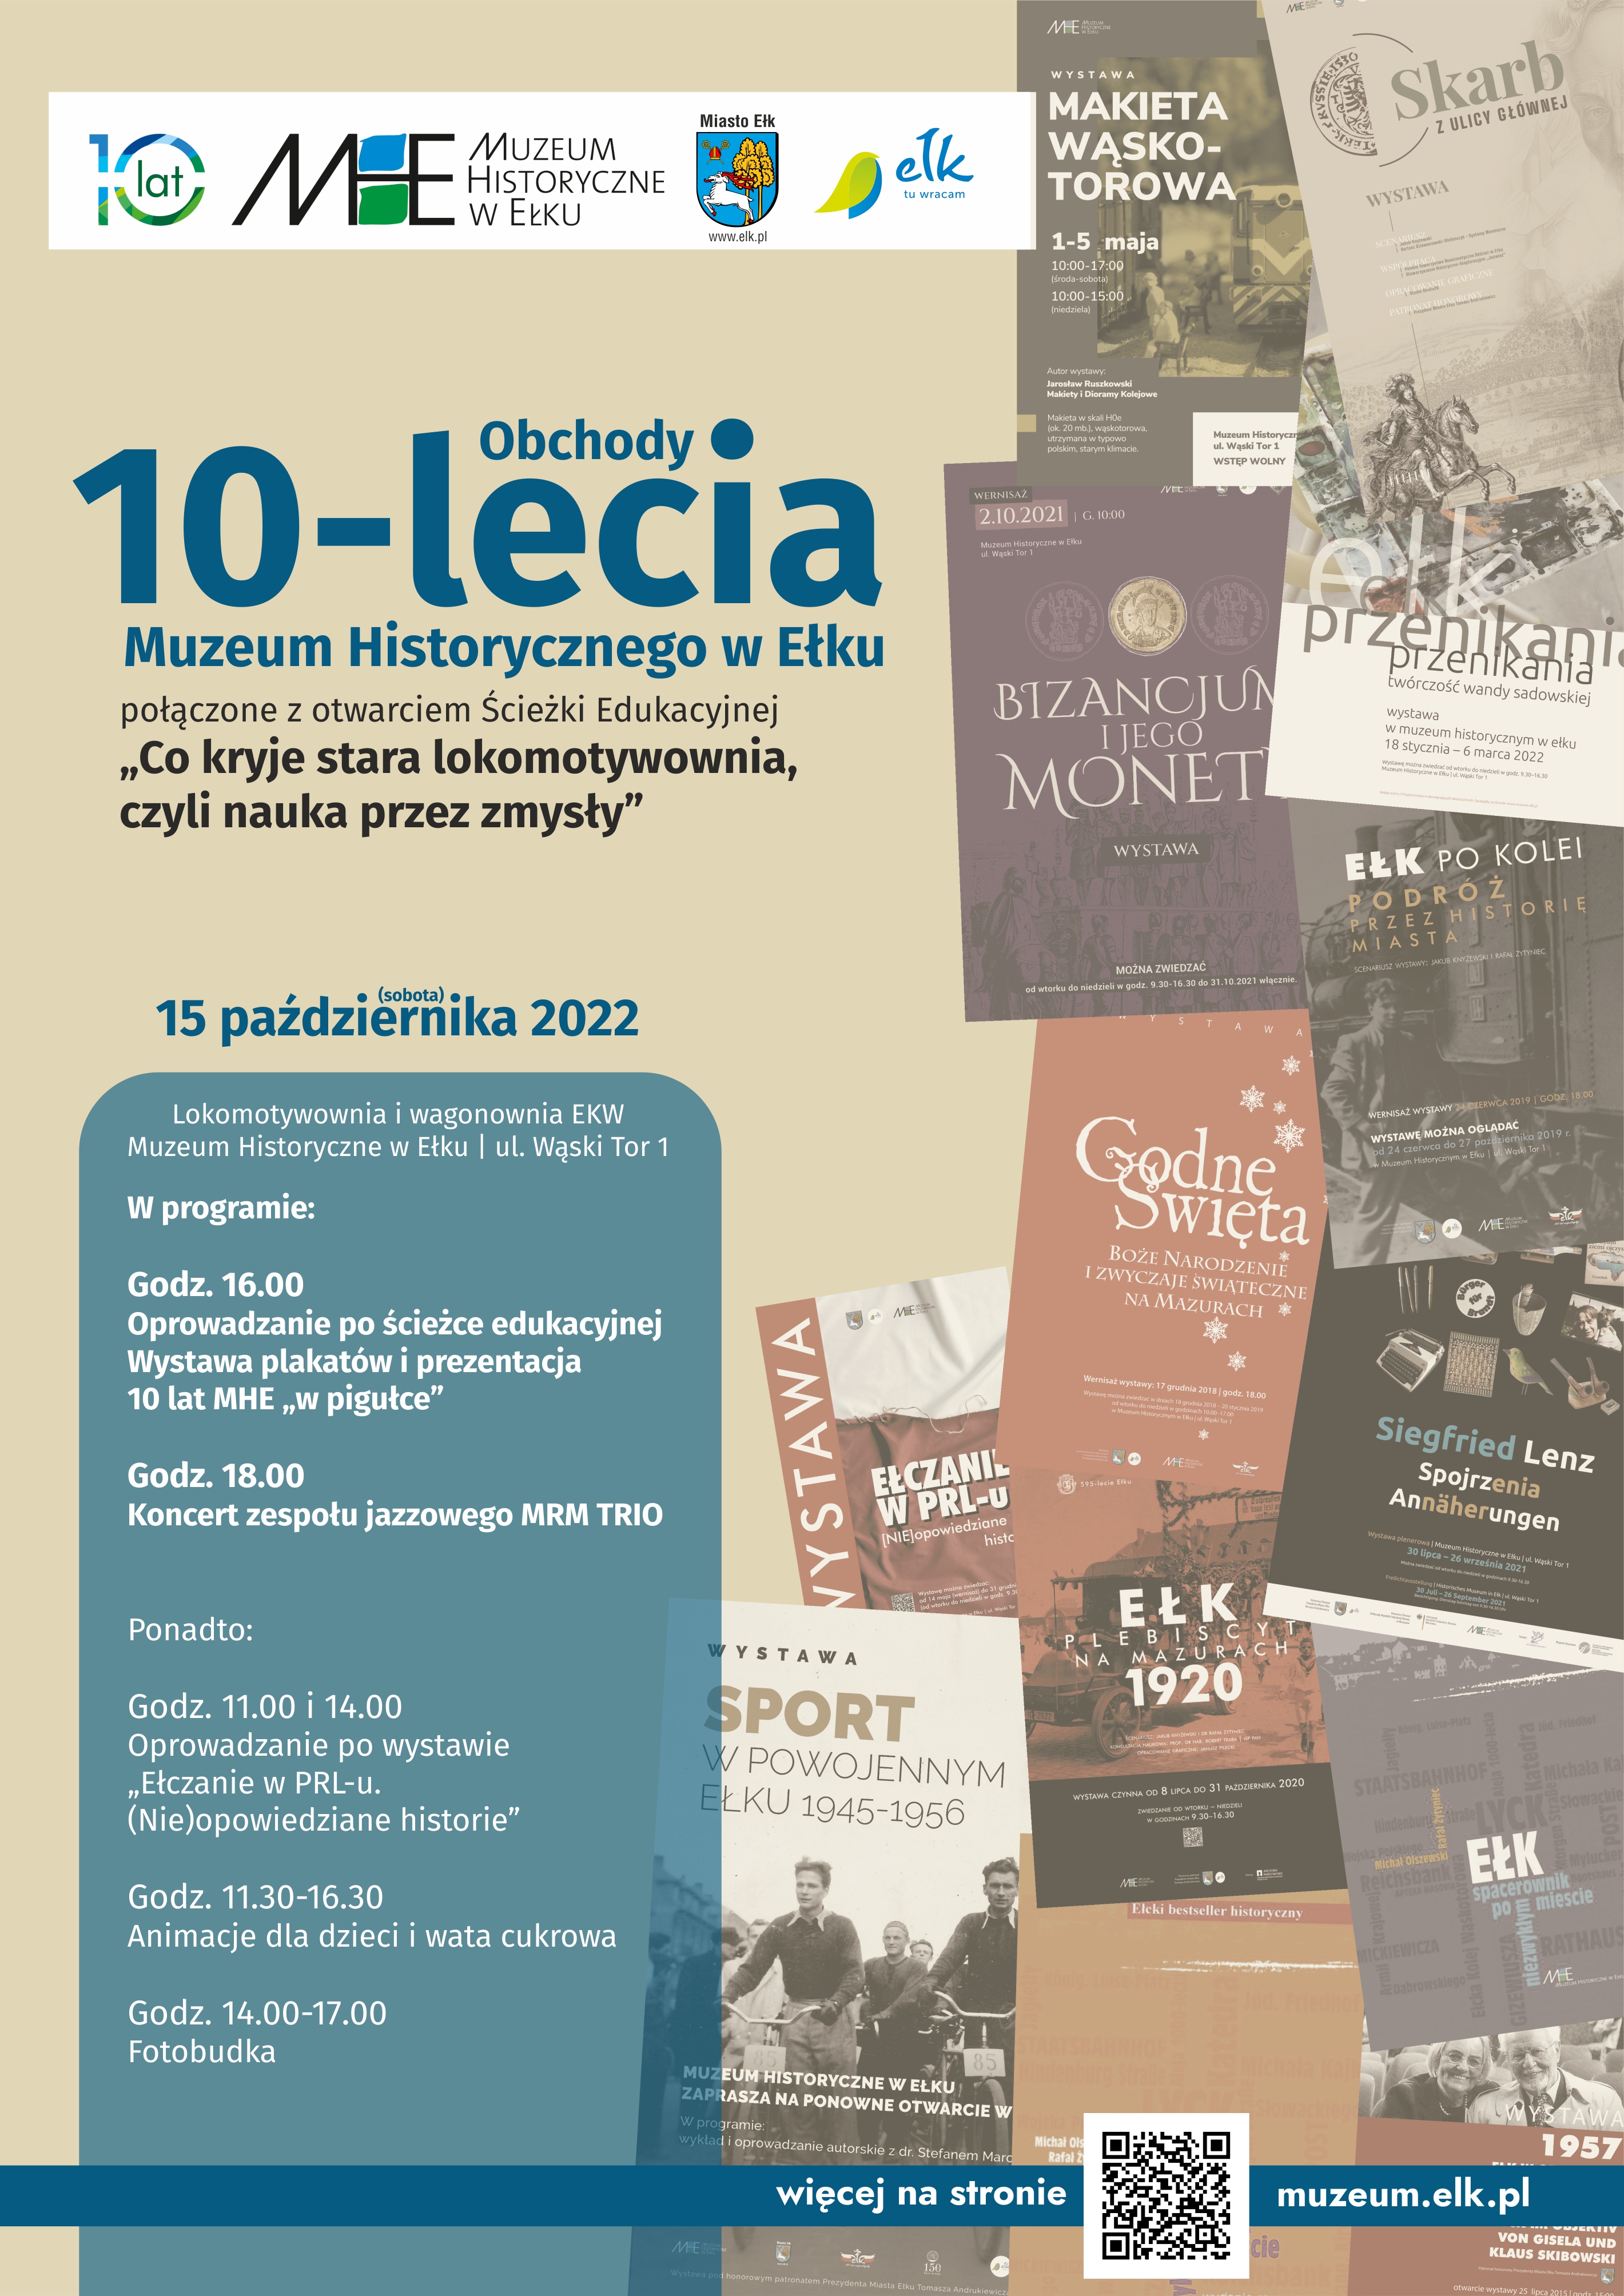 The Historical Museum in Ełk is already 10 years old!